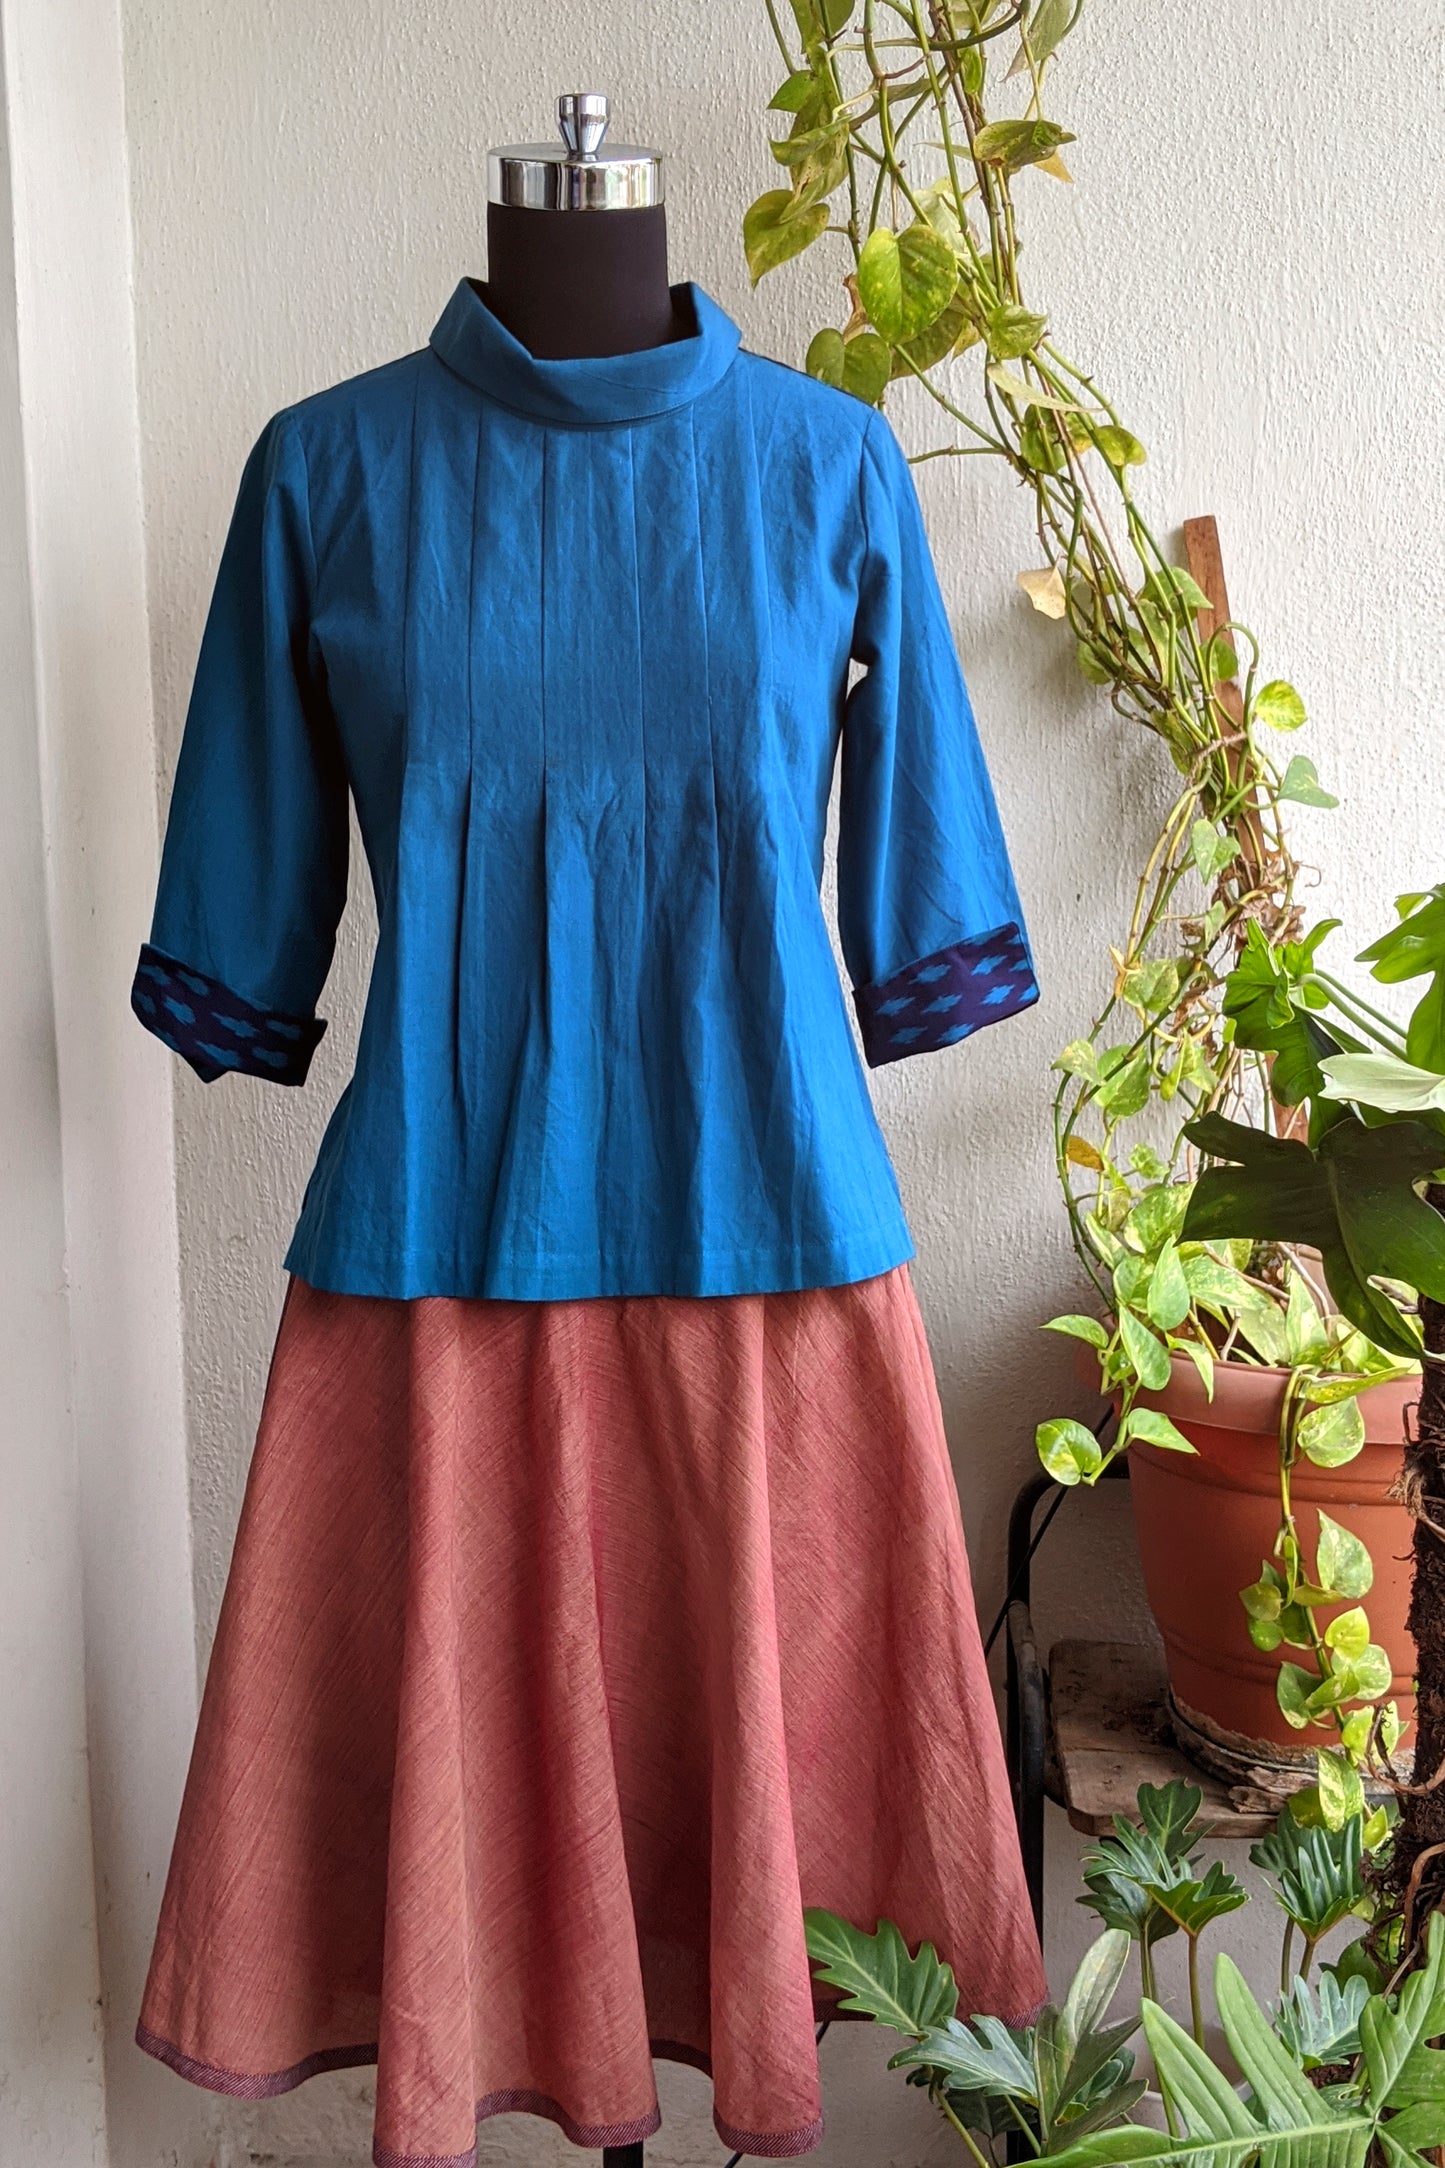 Filter Coffee Top -  Blue Cotton with Dark Blue Cotton with Ikkat